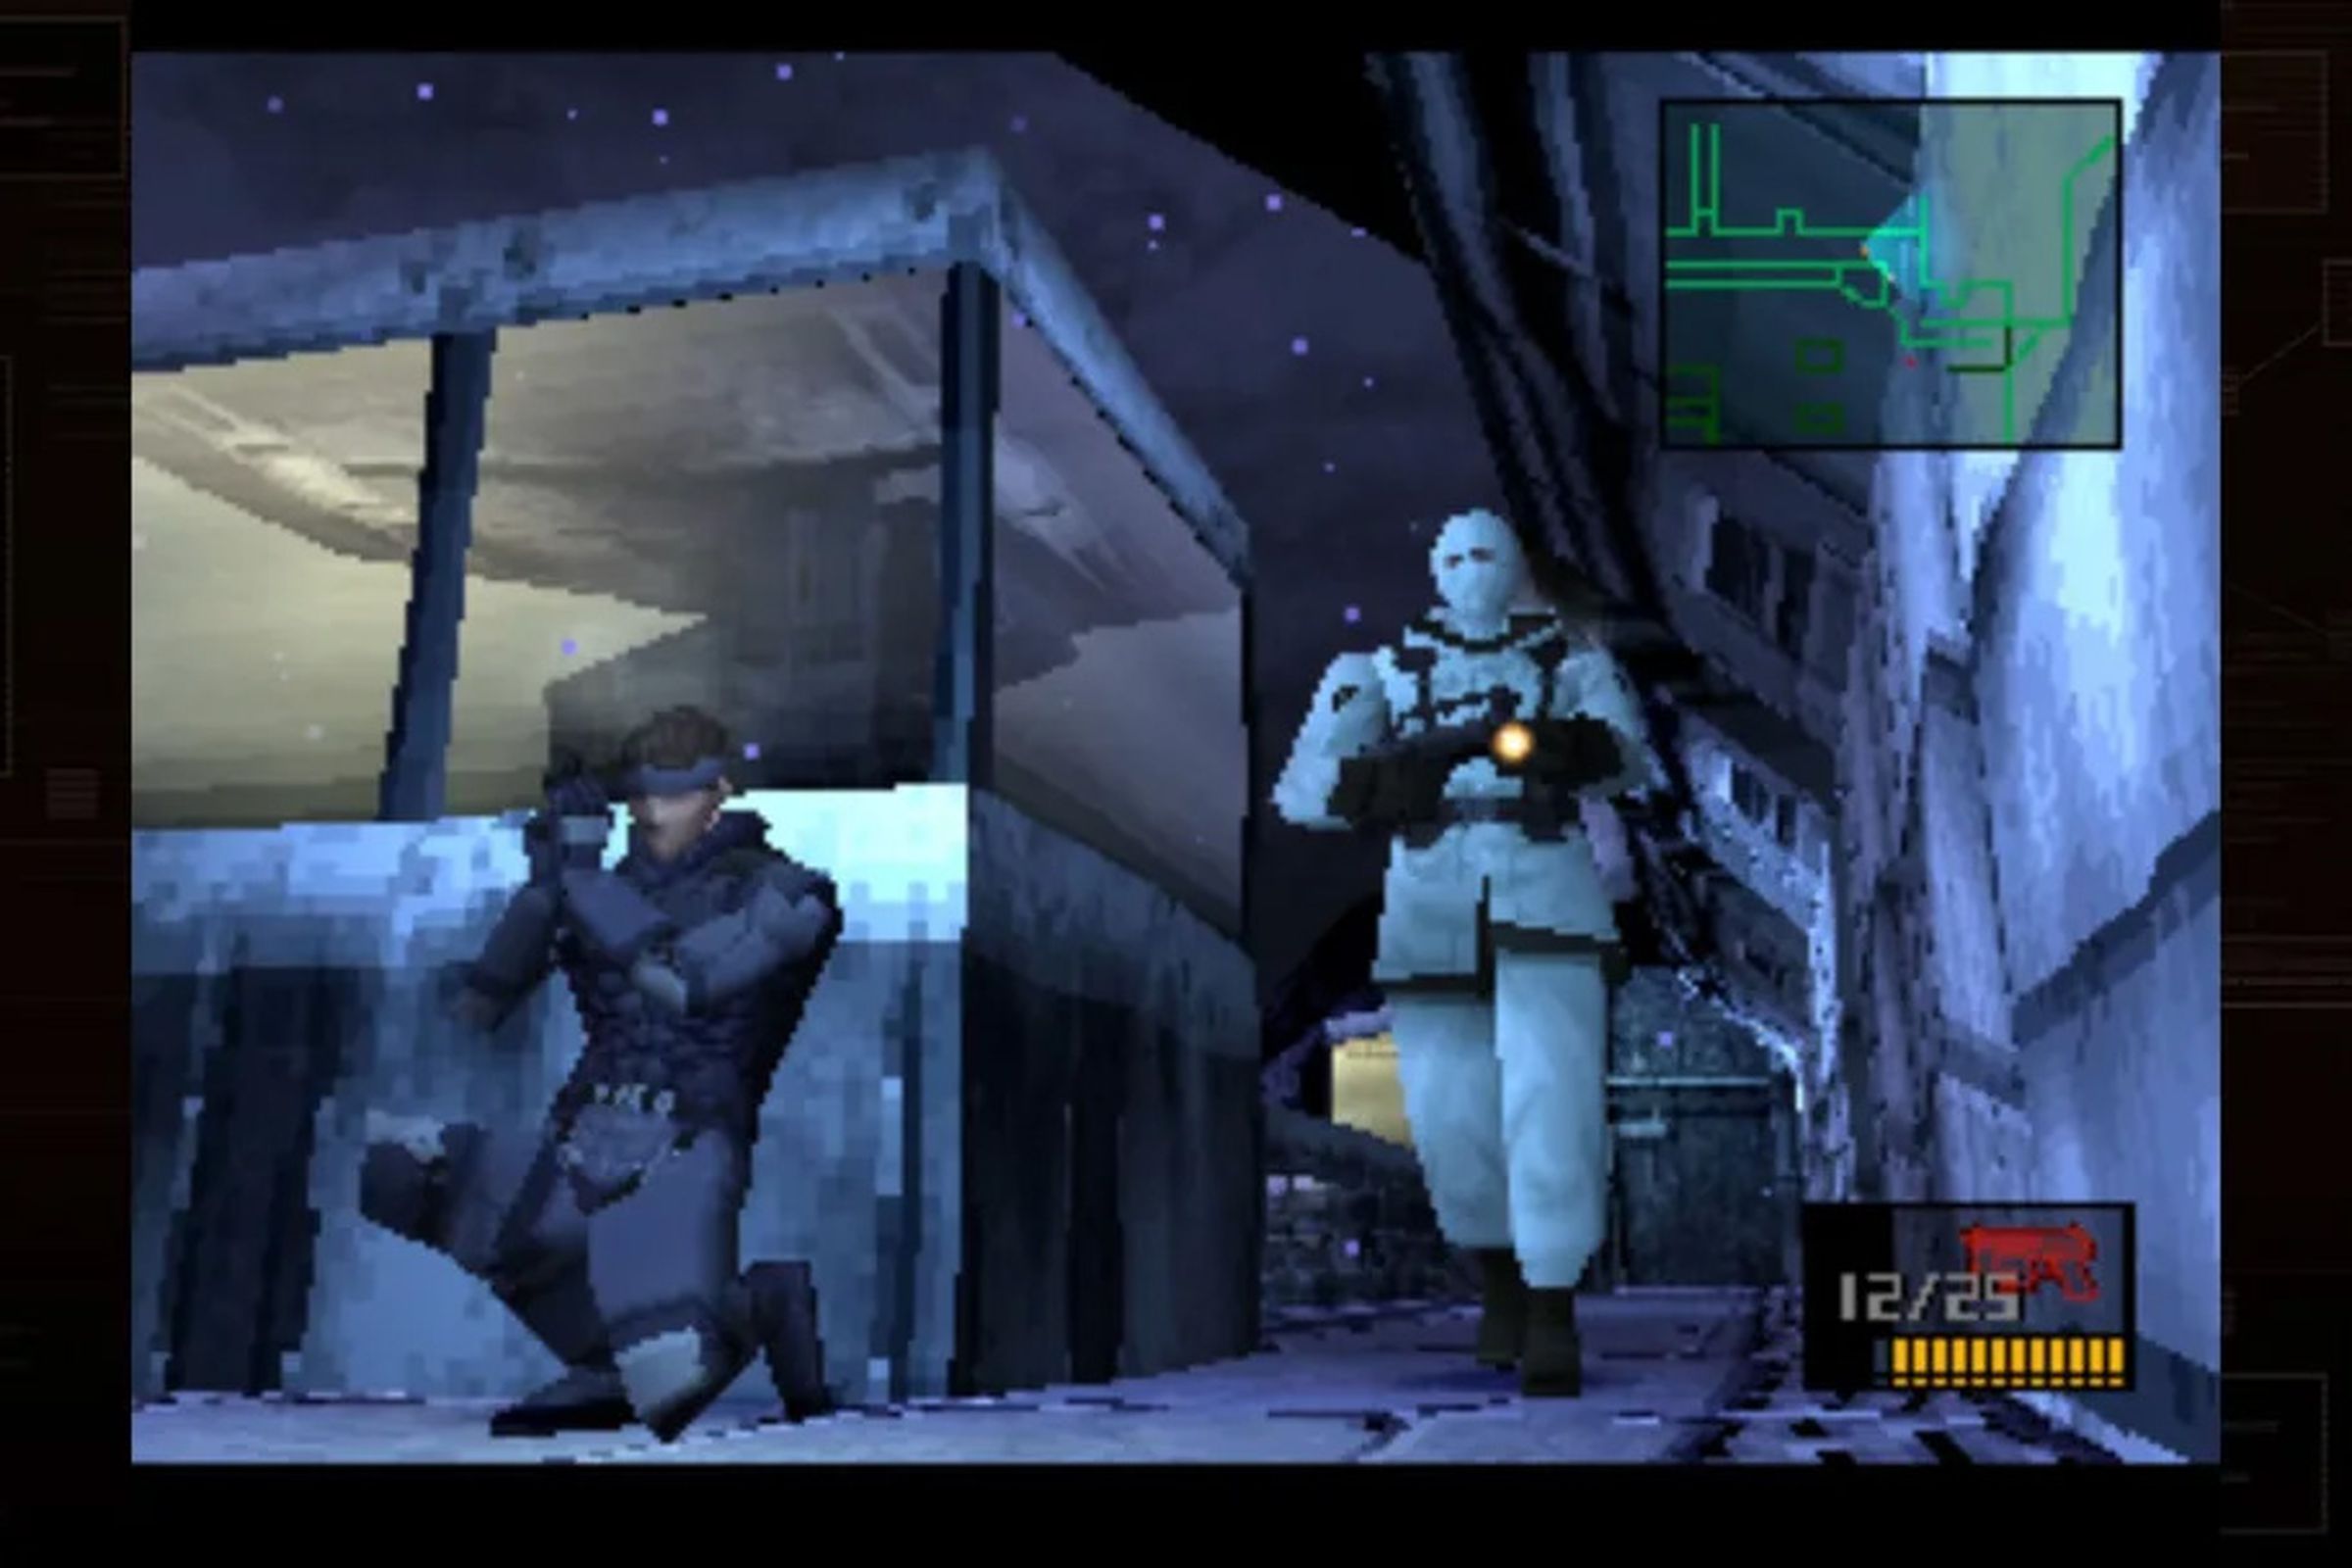 Solid Snake crouches to hide from an enemy.